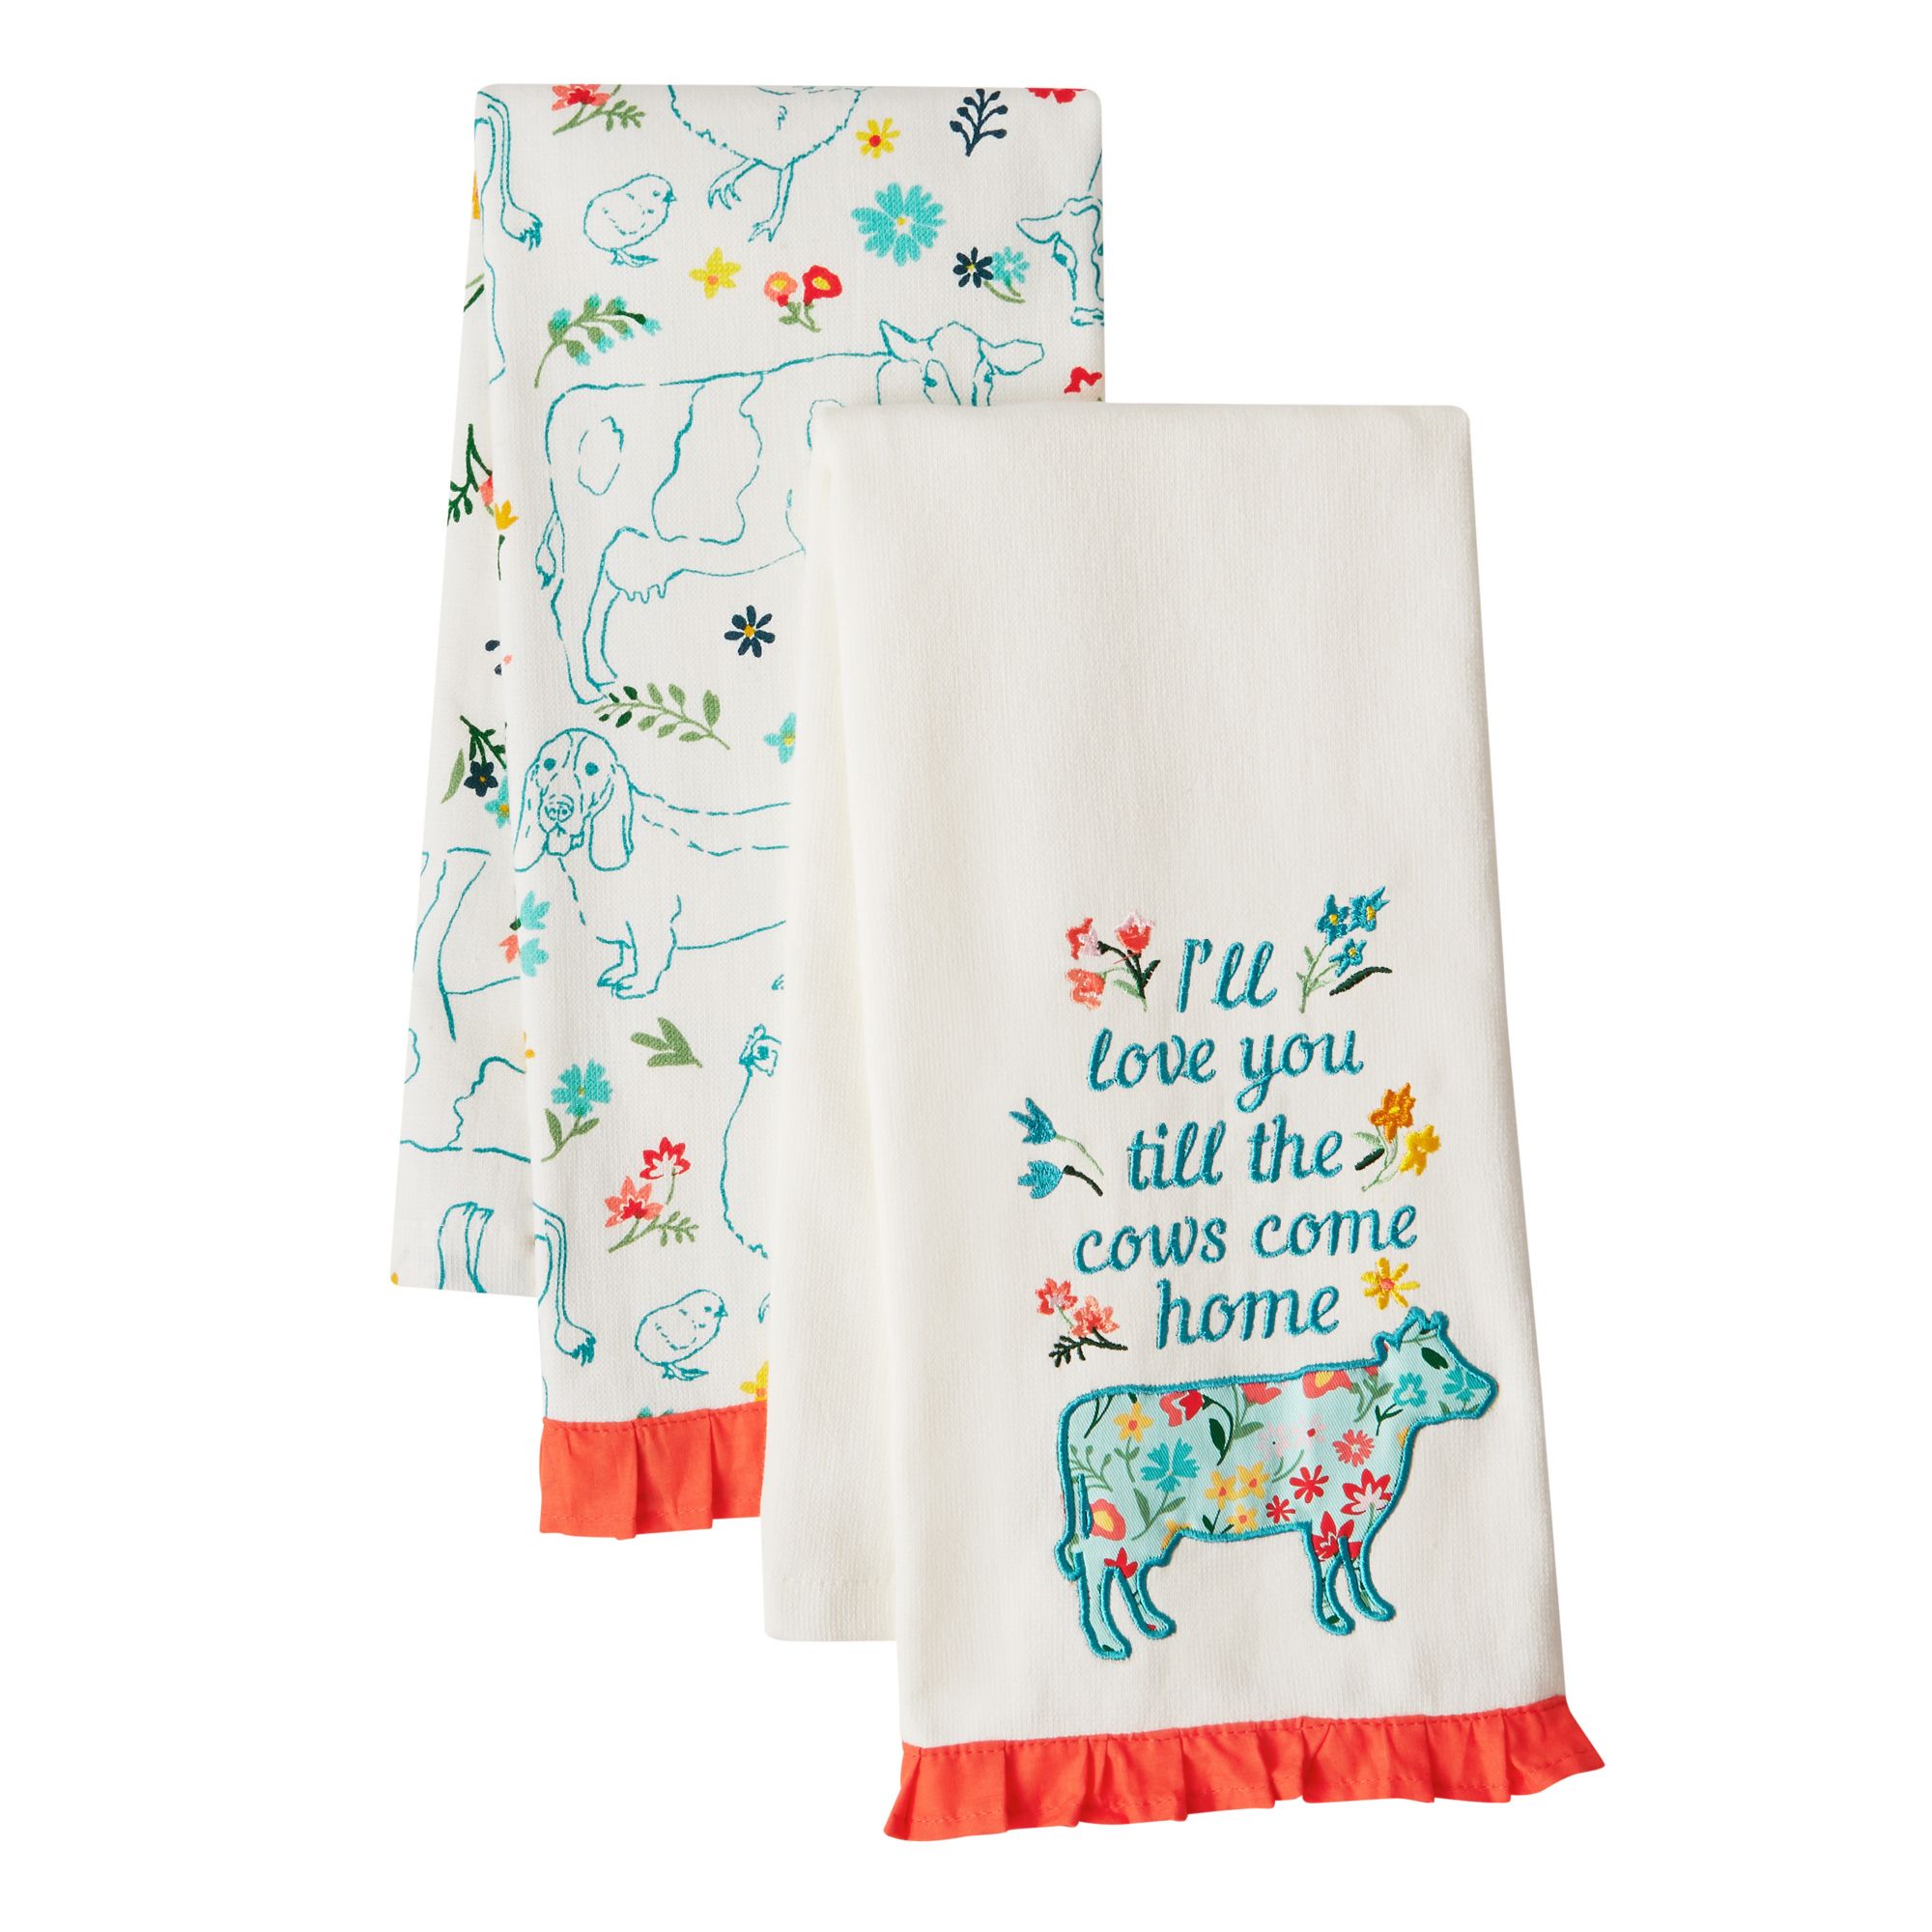 The Pioneer Woman Animals Kitchen Towel Set, Multi-color, 20" x 30", Set of 2 - image 1 of 5